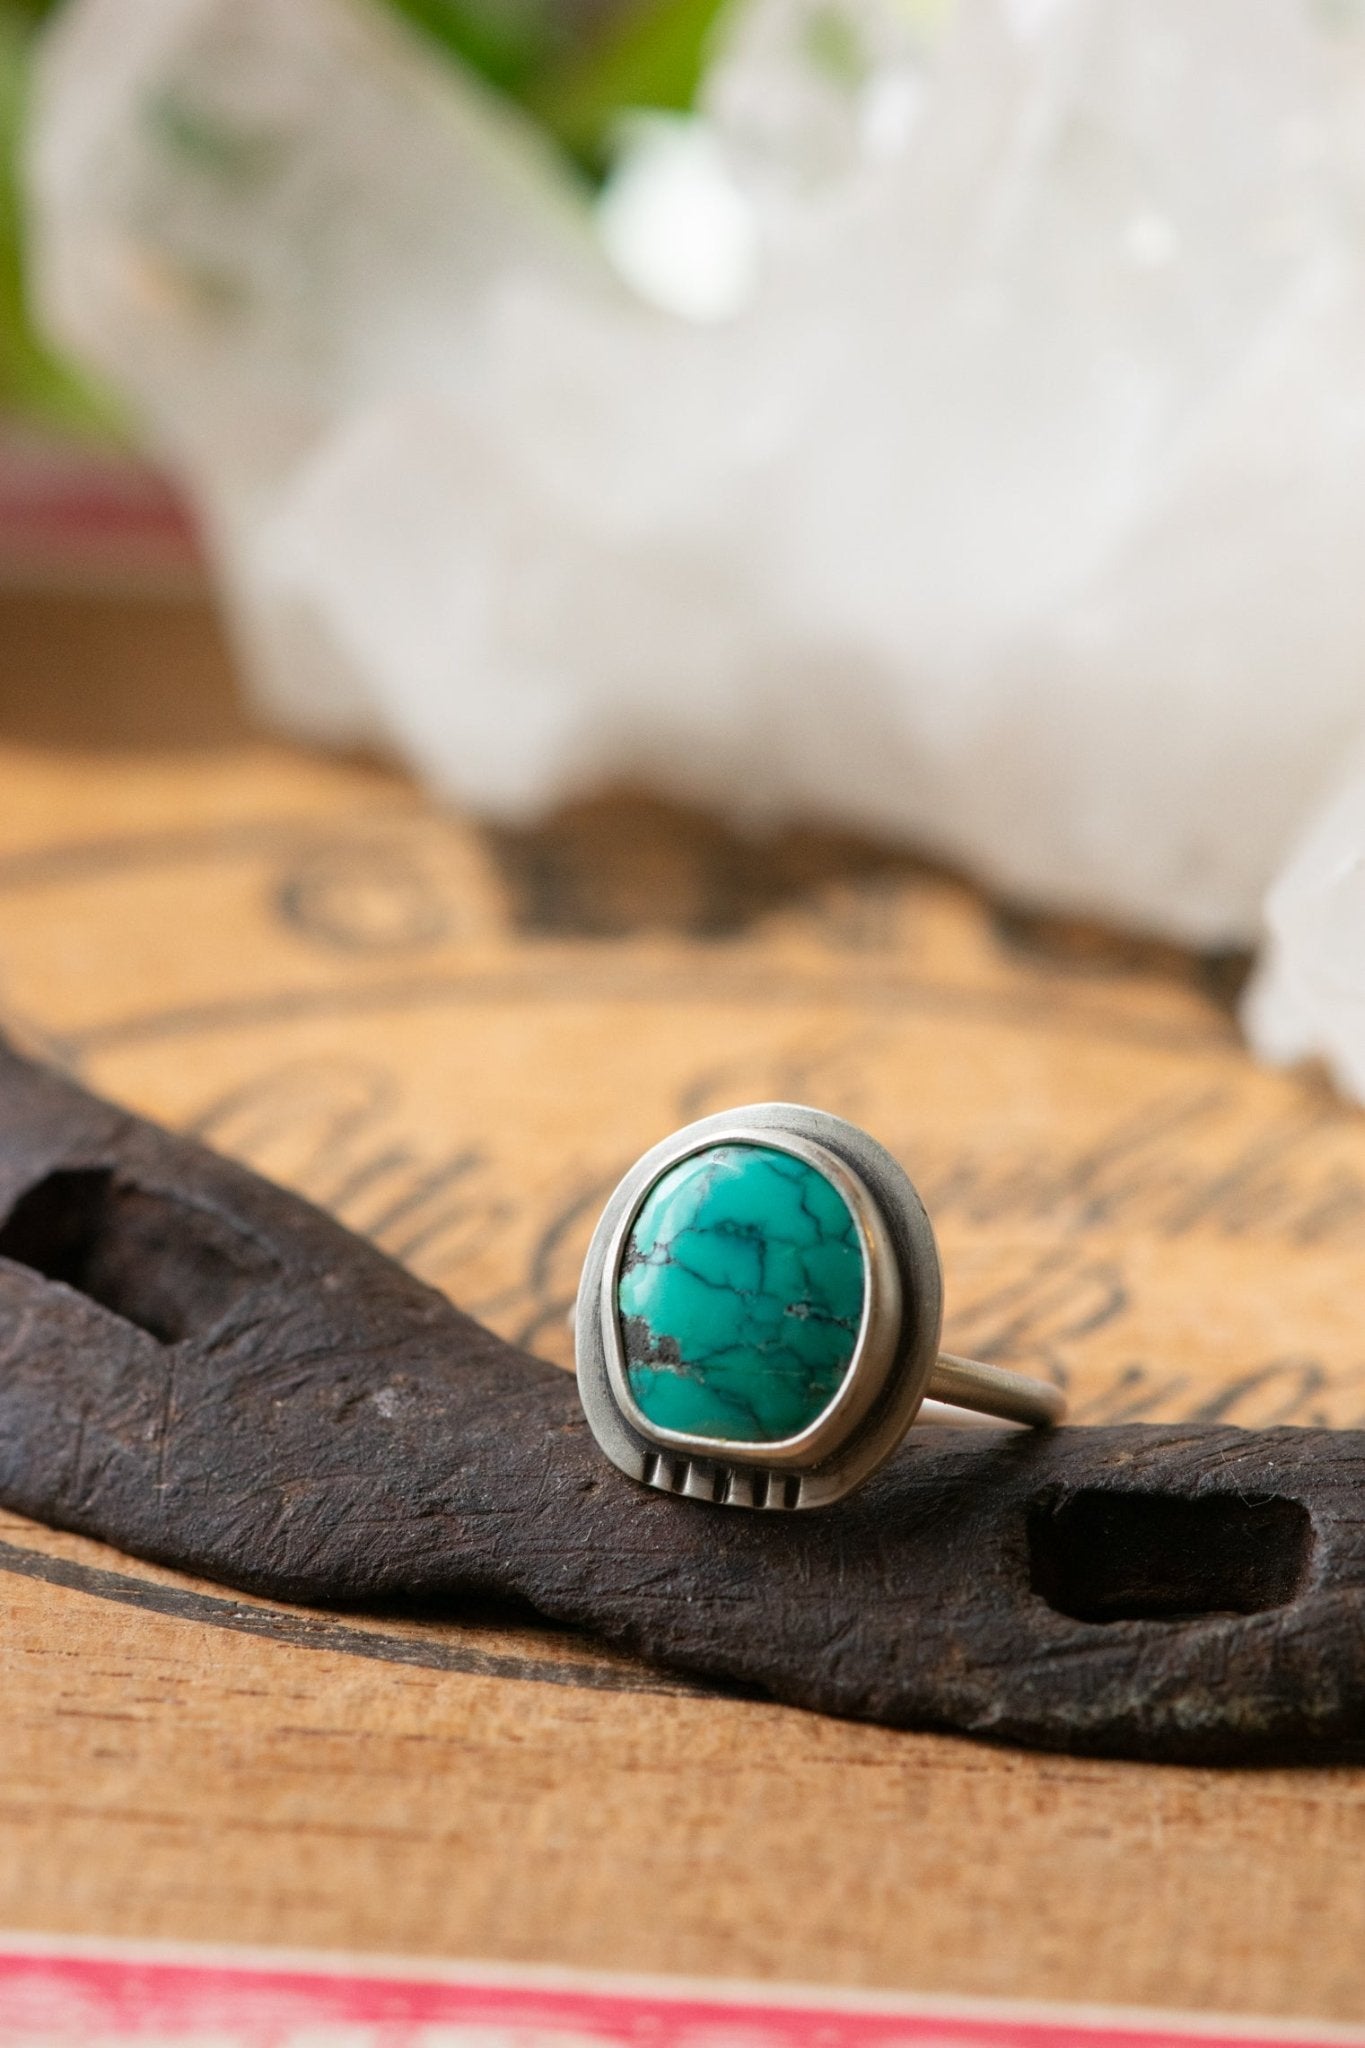 Load image into Gallery viewer, SKY STONE TURQUOISE RING - Fly Free
